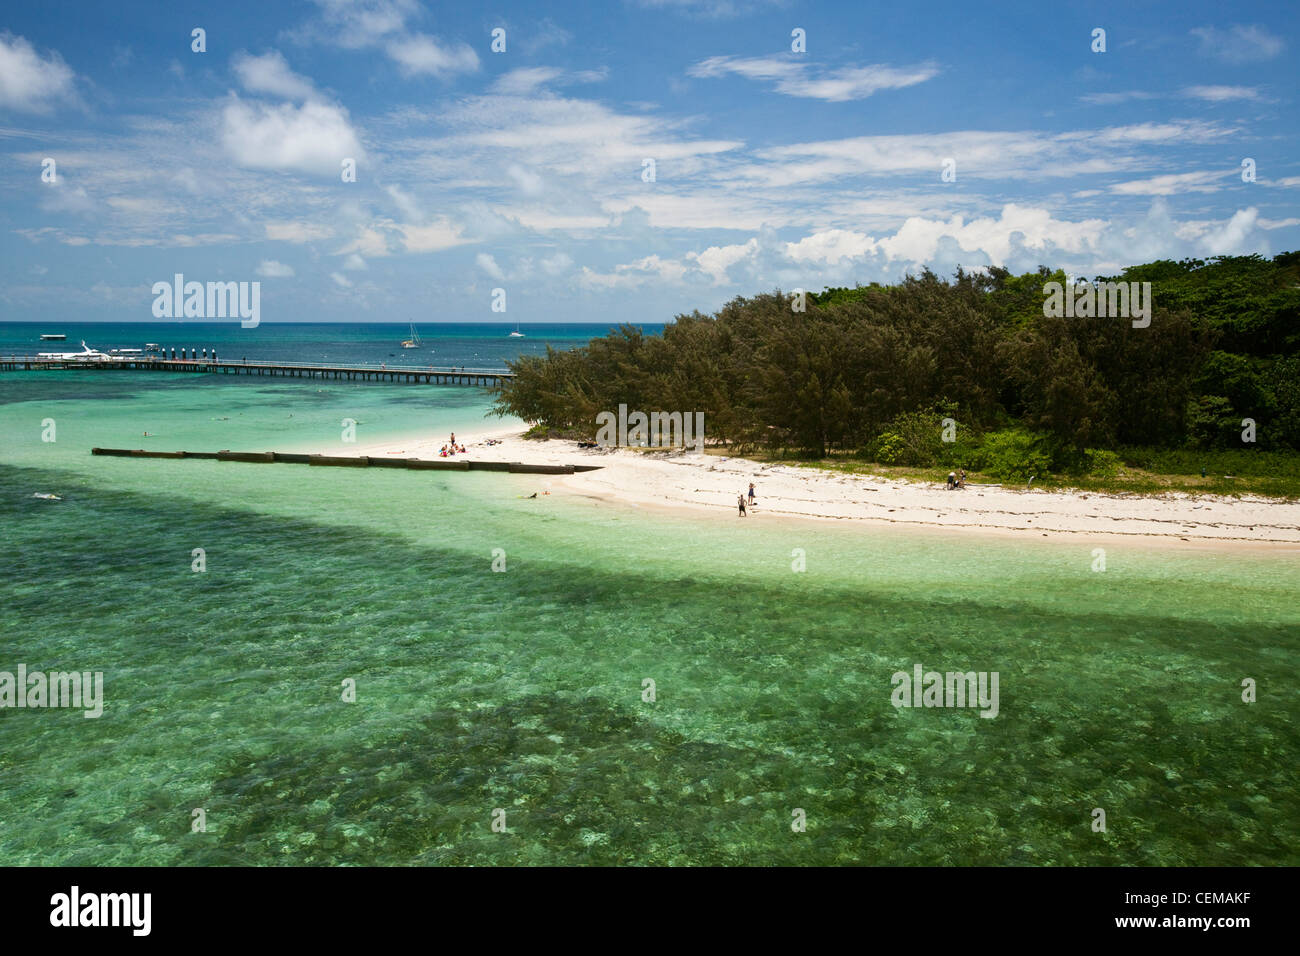 Aerial view of Green Island - a coral cay near Cairns. Great Barrier Reef, Queensland, Australia Stock Photo